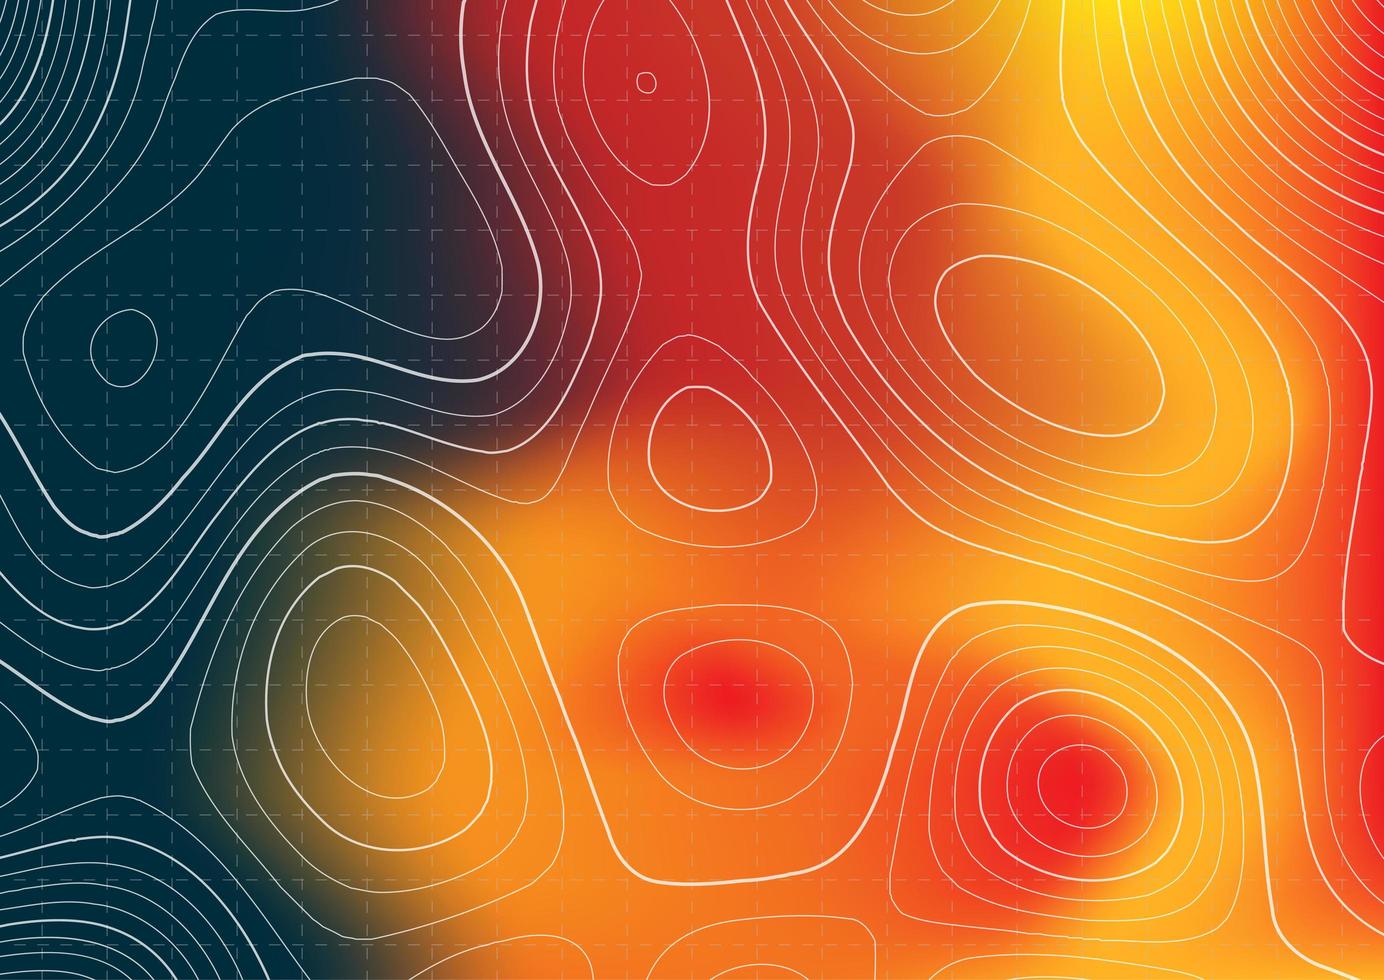 Topography design with heat map overlay vector